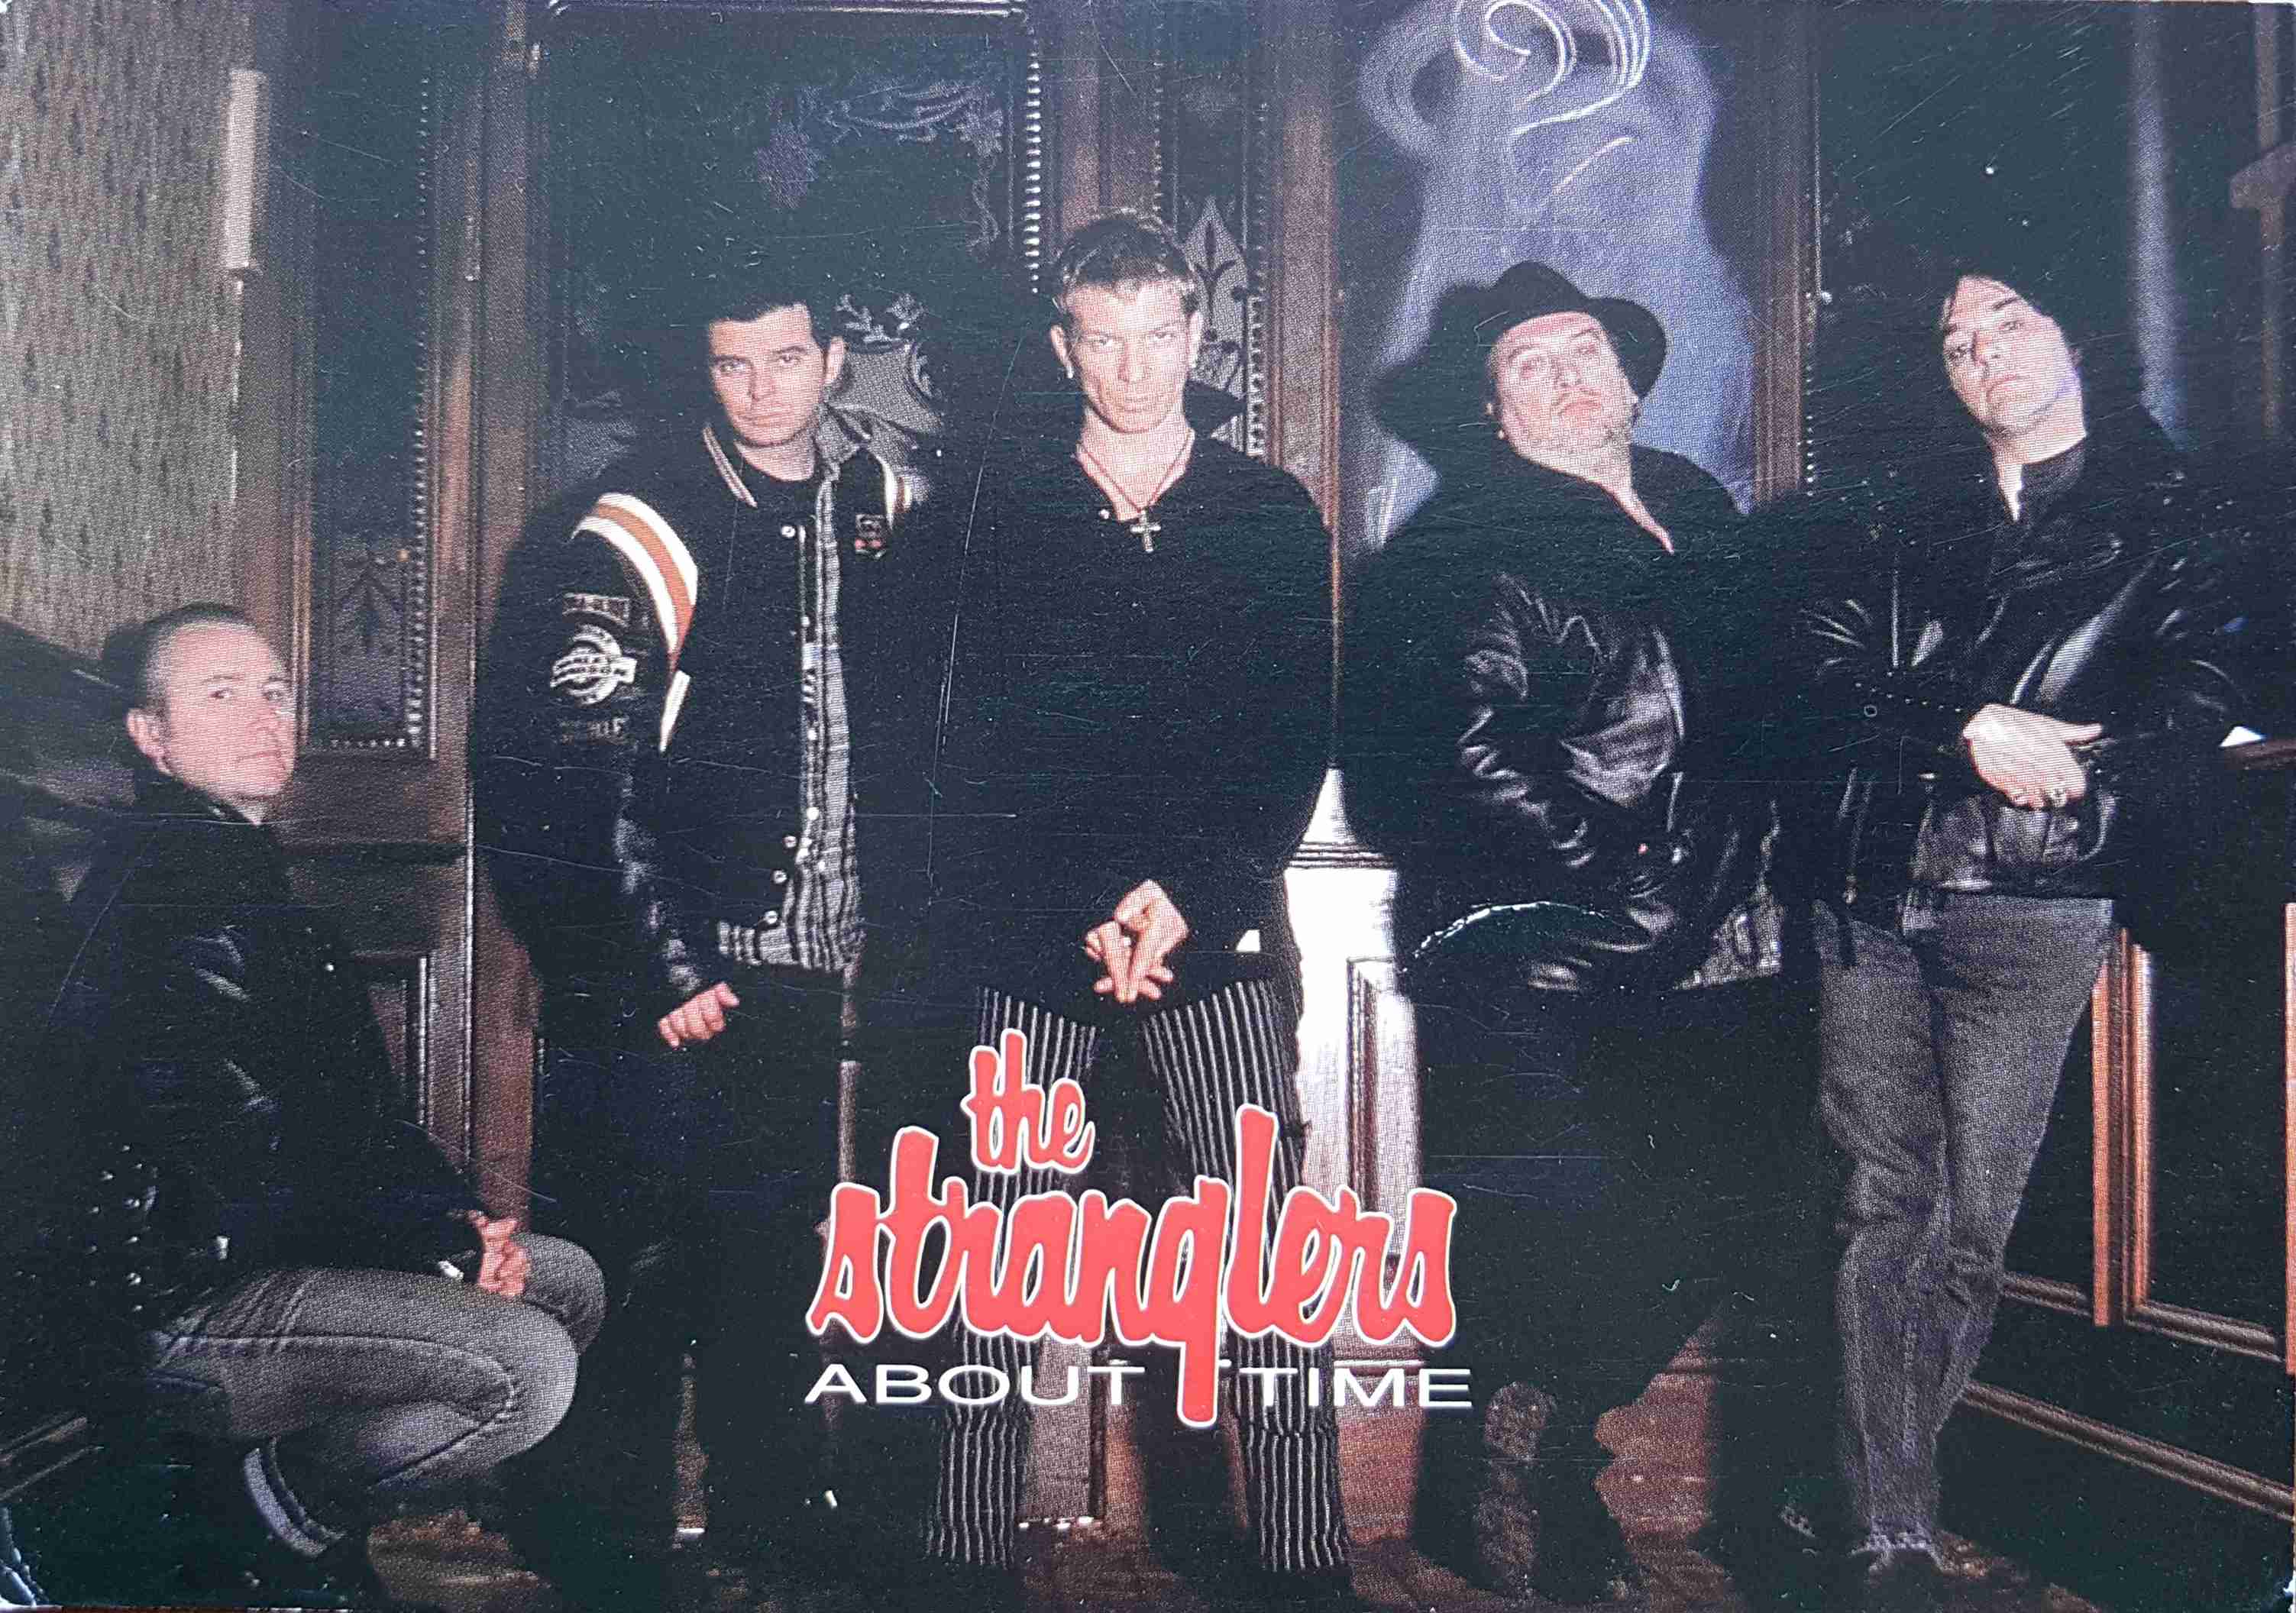 Picture of About time by artist The Stranglers  from The Stranglers postcards